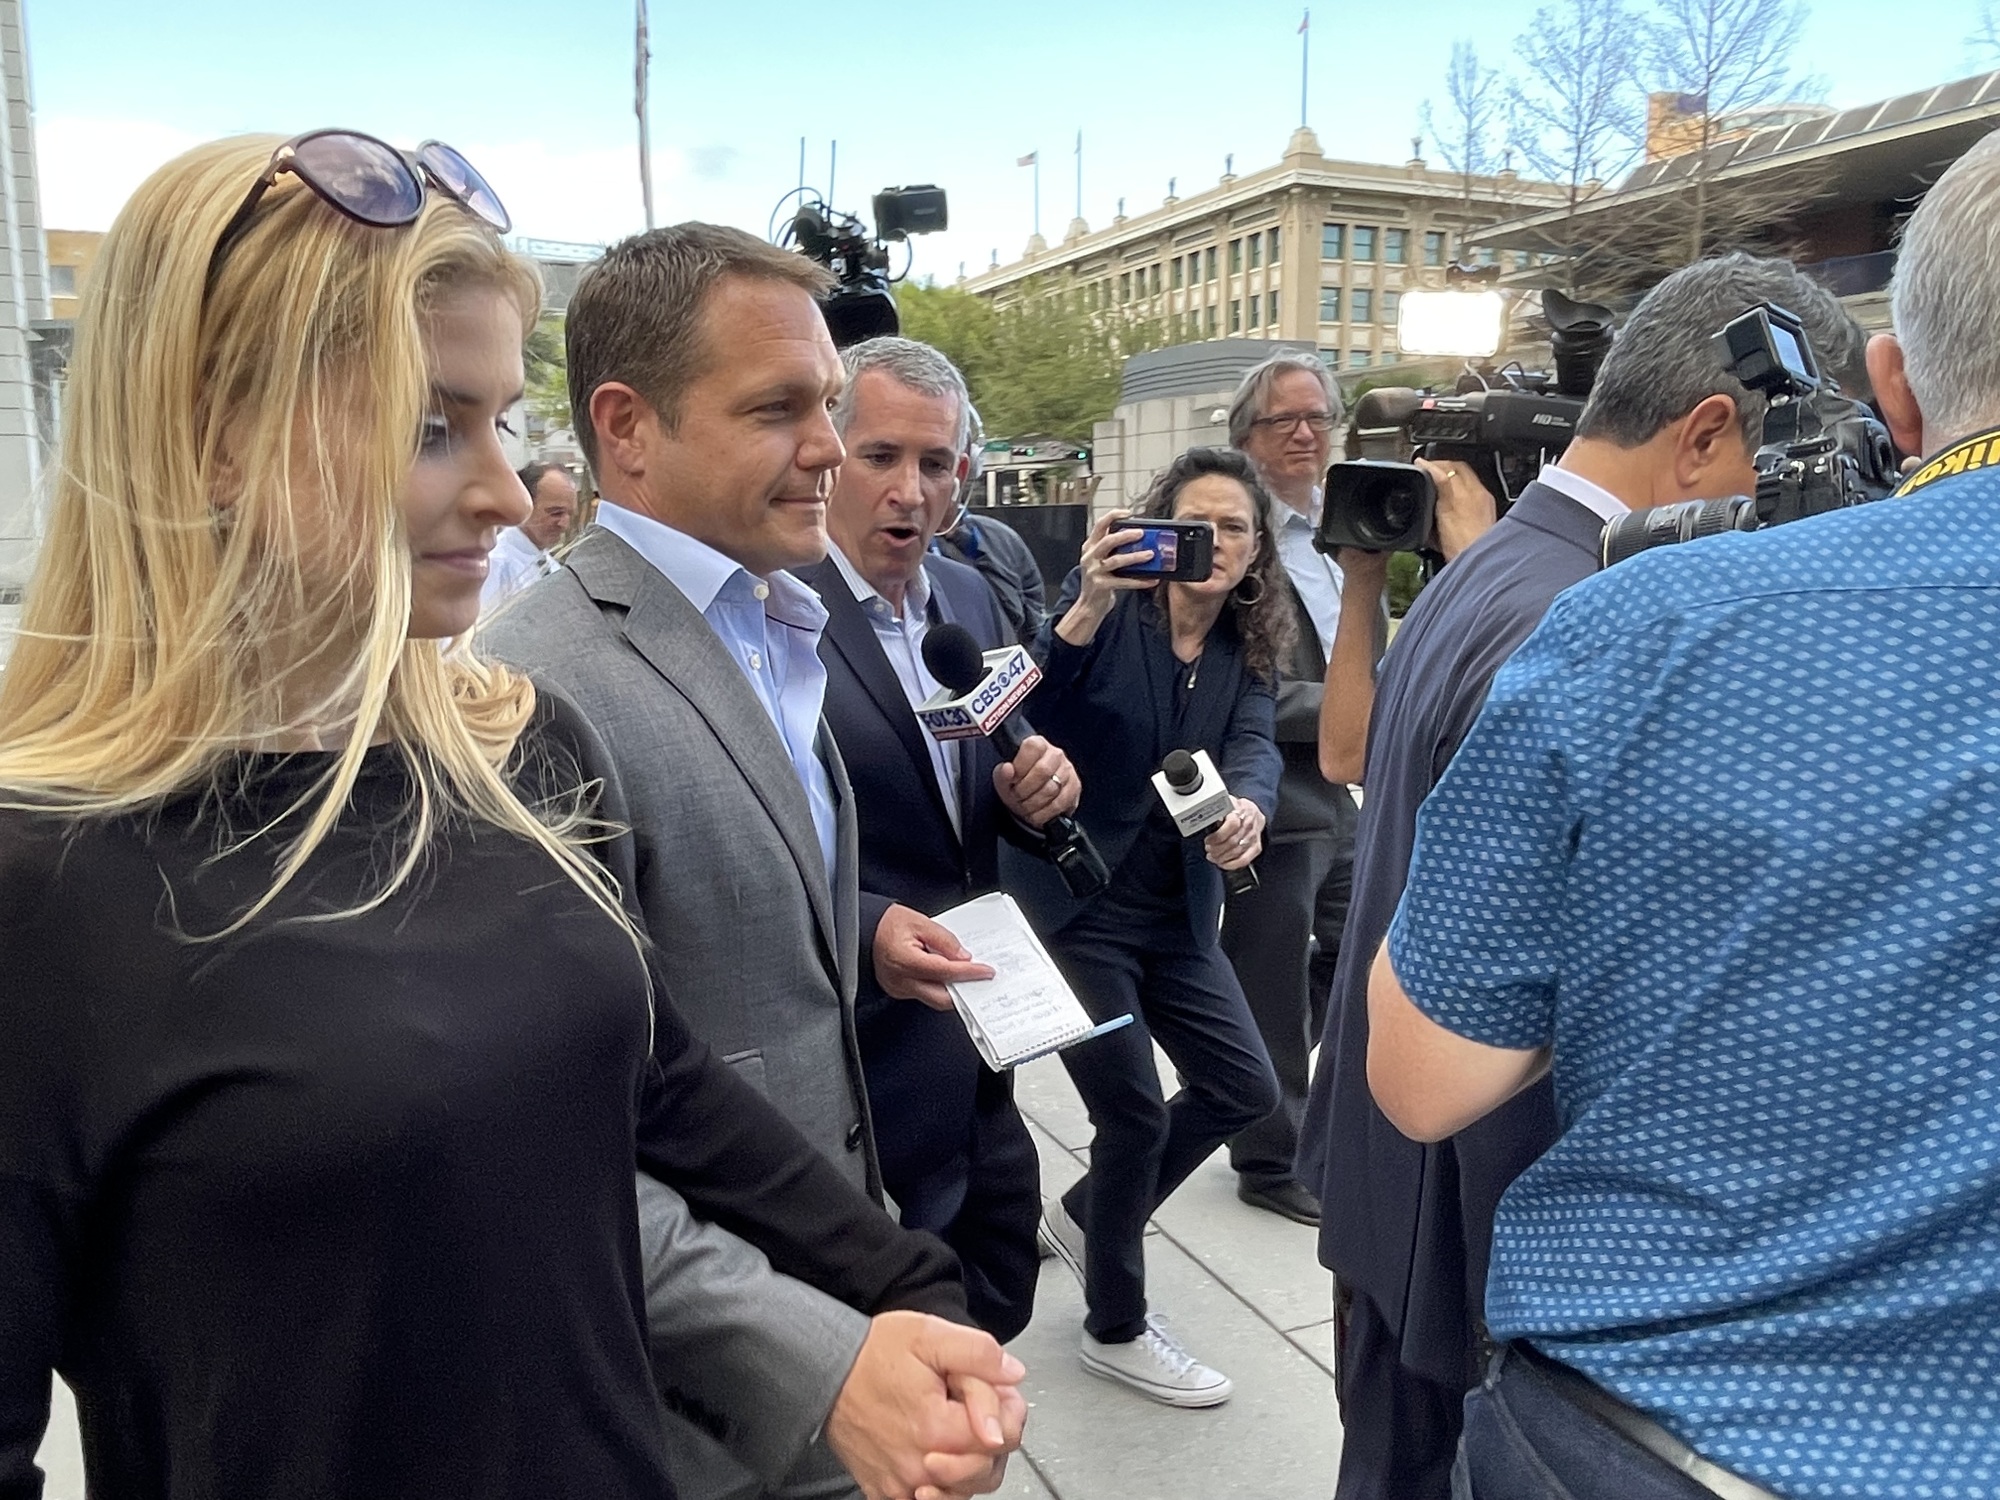 Indicted former JEA CEO Aaron Zahn, center, walks out of the Bryan Simpson U.S. Courthouse Downtown on March 8 with his wife after he pleaded not guilty to federal charges.